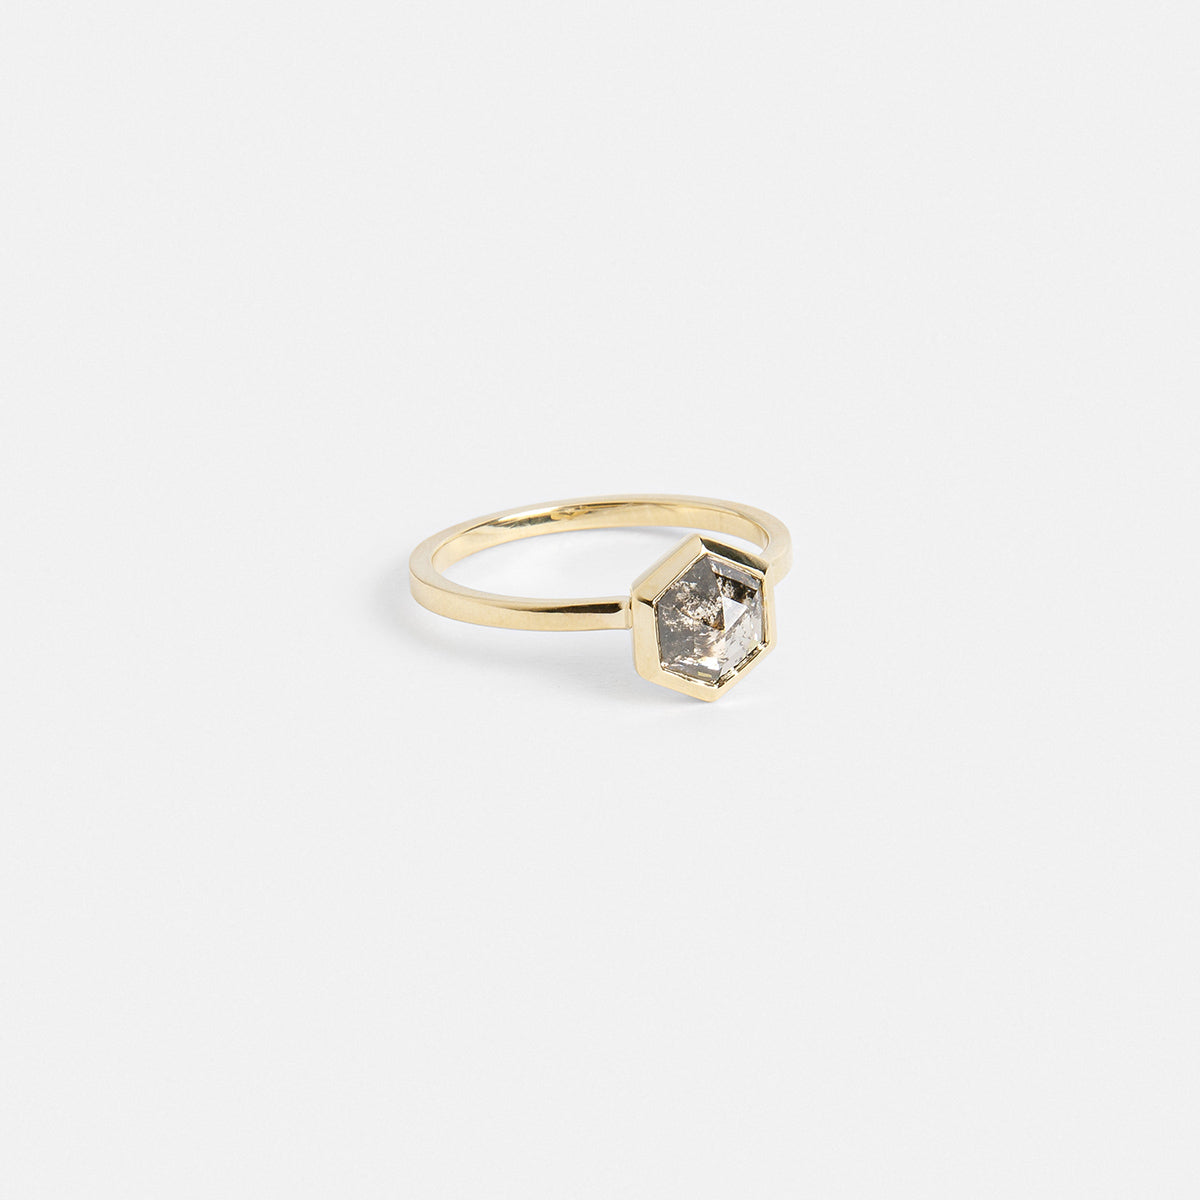 Luca Alternative Ring in 14k Gold set with a 0.99ct salt and pepper hexagon diamond By SHW Fine Jewelry NYC